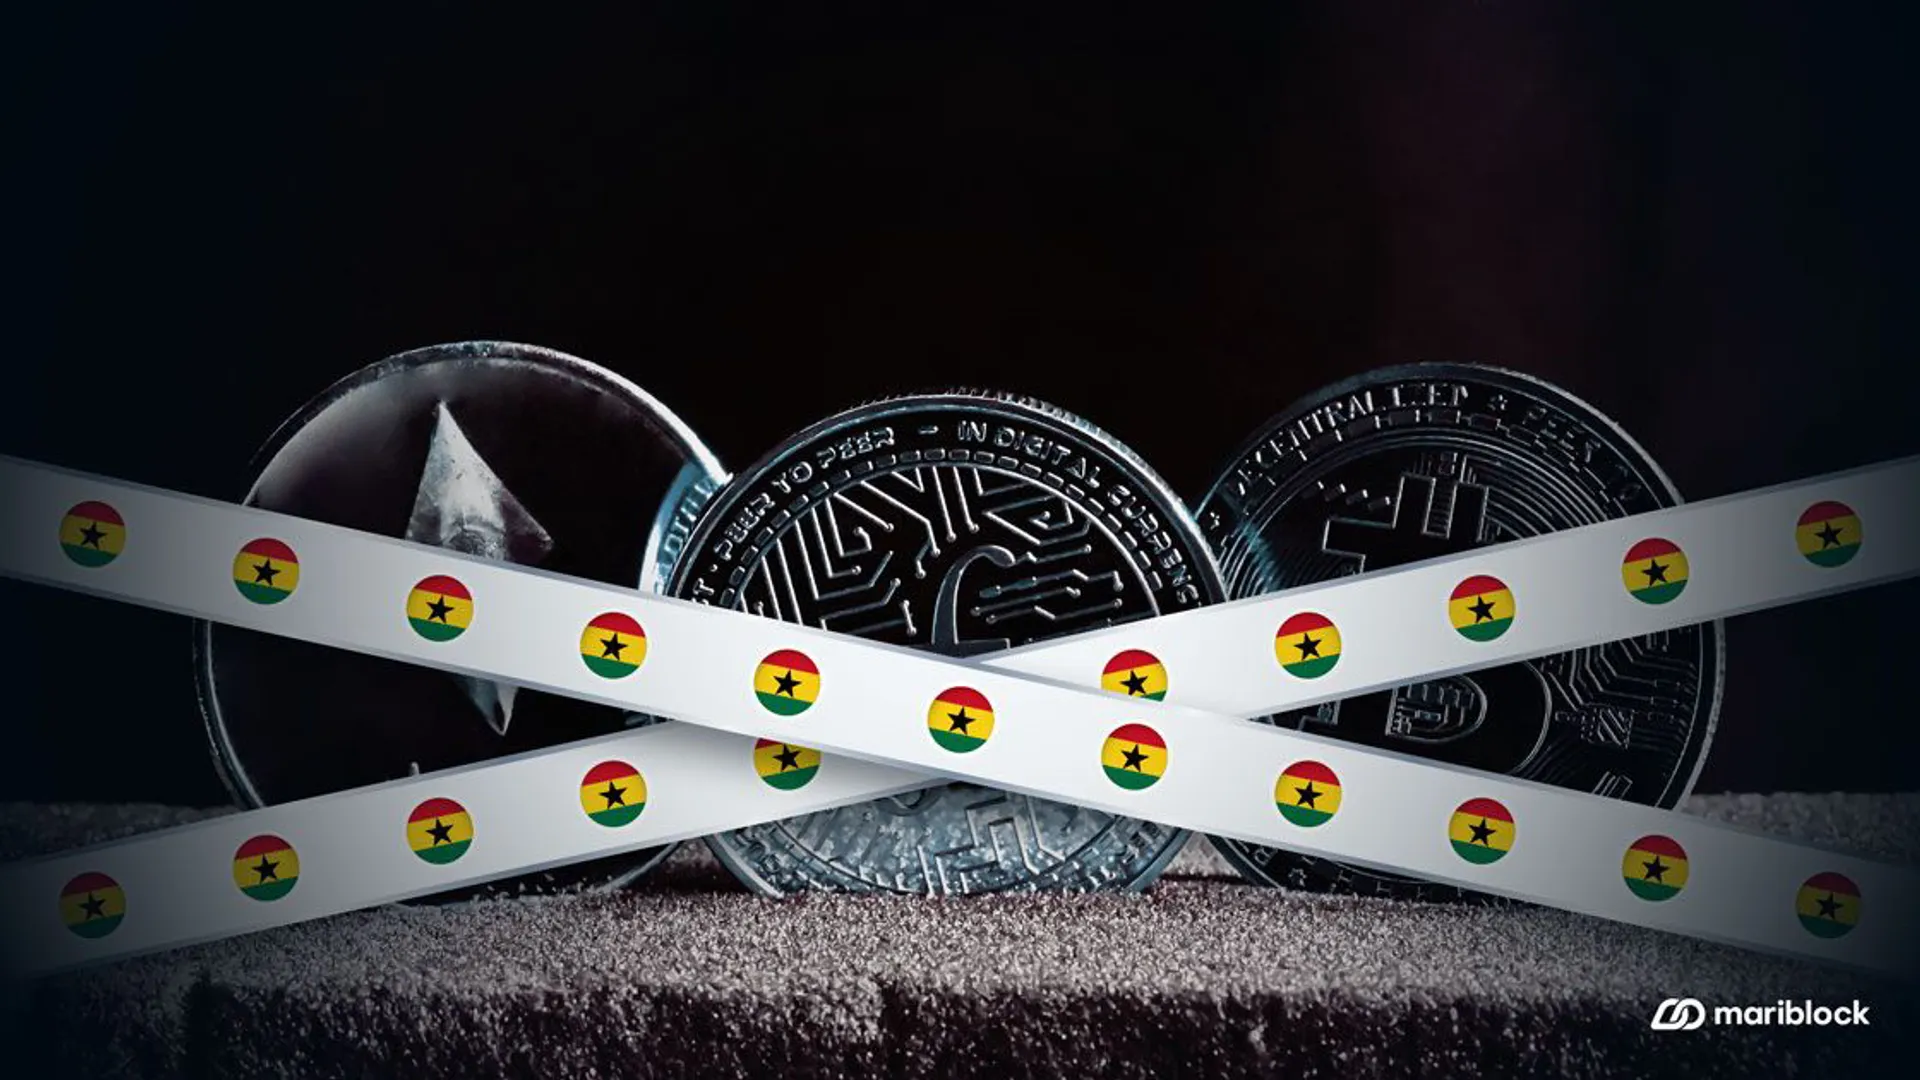 🔒 **Ghana's Firm Stance on Cryptocurrency**: A New Challenge in the Web3 Space?

I was speaking with a member of my community yesterday and he advised that recently, Dr. Mohammed Amin Adam, the Minister of State at the Finance Ministry of Ghana, reinforced the government's directive prohibiting all licensed financial institutions from facilitating cryptocurrency transactions. This stance, until a comprehensive regulatory framework is established, aims to preserve the integrity of the digital space and protect consumers.

🤔 **Our Thoughts**:
While the Ghanaian government's move aligns with a cautious approach to a nascent technology, it also puts a spotlight on the delicate balance needed between regulation and innovation. Cryptocurrencies, being a cornerstone of the Web3 movement, offer a plethora of use cases, such as cross-border payments, decentralised finance, and transparent governance models.

🌍 **For the Web3 Community**:
This situation calls for constructive dialogue between regulators and innovators. By working together, we can build an ecosystem that not only safeguards the interests of consumers but also fosters growth and adoption of decentralised technologies.

🚀 **Let's Bridge the Gap**:
As pioneers in bridging the mainstream and the metaverse, we see an opportunity to lead by example, sharing insights, and promoting collaboration. Ghana's case reminds us that the Web3 journey is full of challenges, but with empathy, understanding, and cooperation, we can shape a kinder, worldwide collaborative community.

💬 **Your Thoughts?**:
What does the <@lQfcjguSHmVHImkqQApJK9uy8Gb2> community think about Ghana's decision on cryptocurrencies? How can we, as a community, create an environment that nurtures innovation while ensuring security and transparency? 

Share your thoughts below 👇 